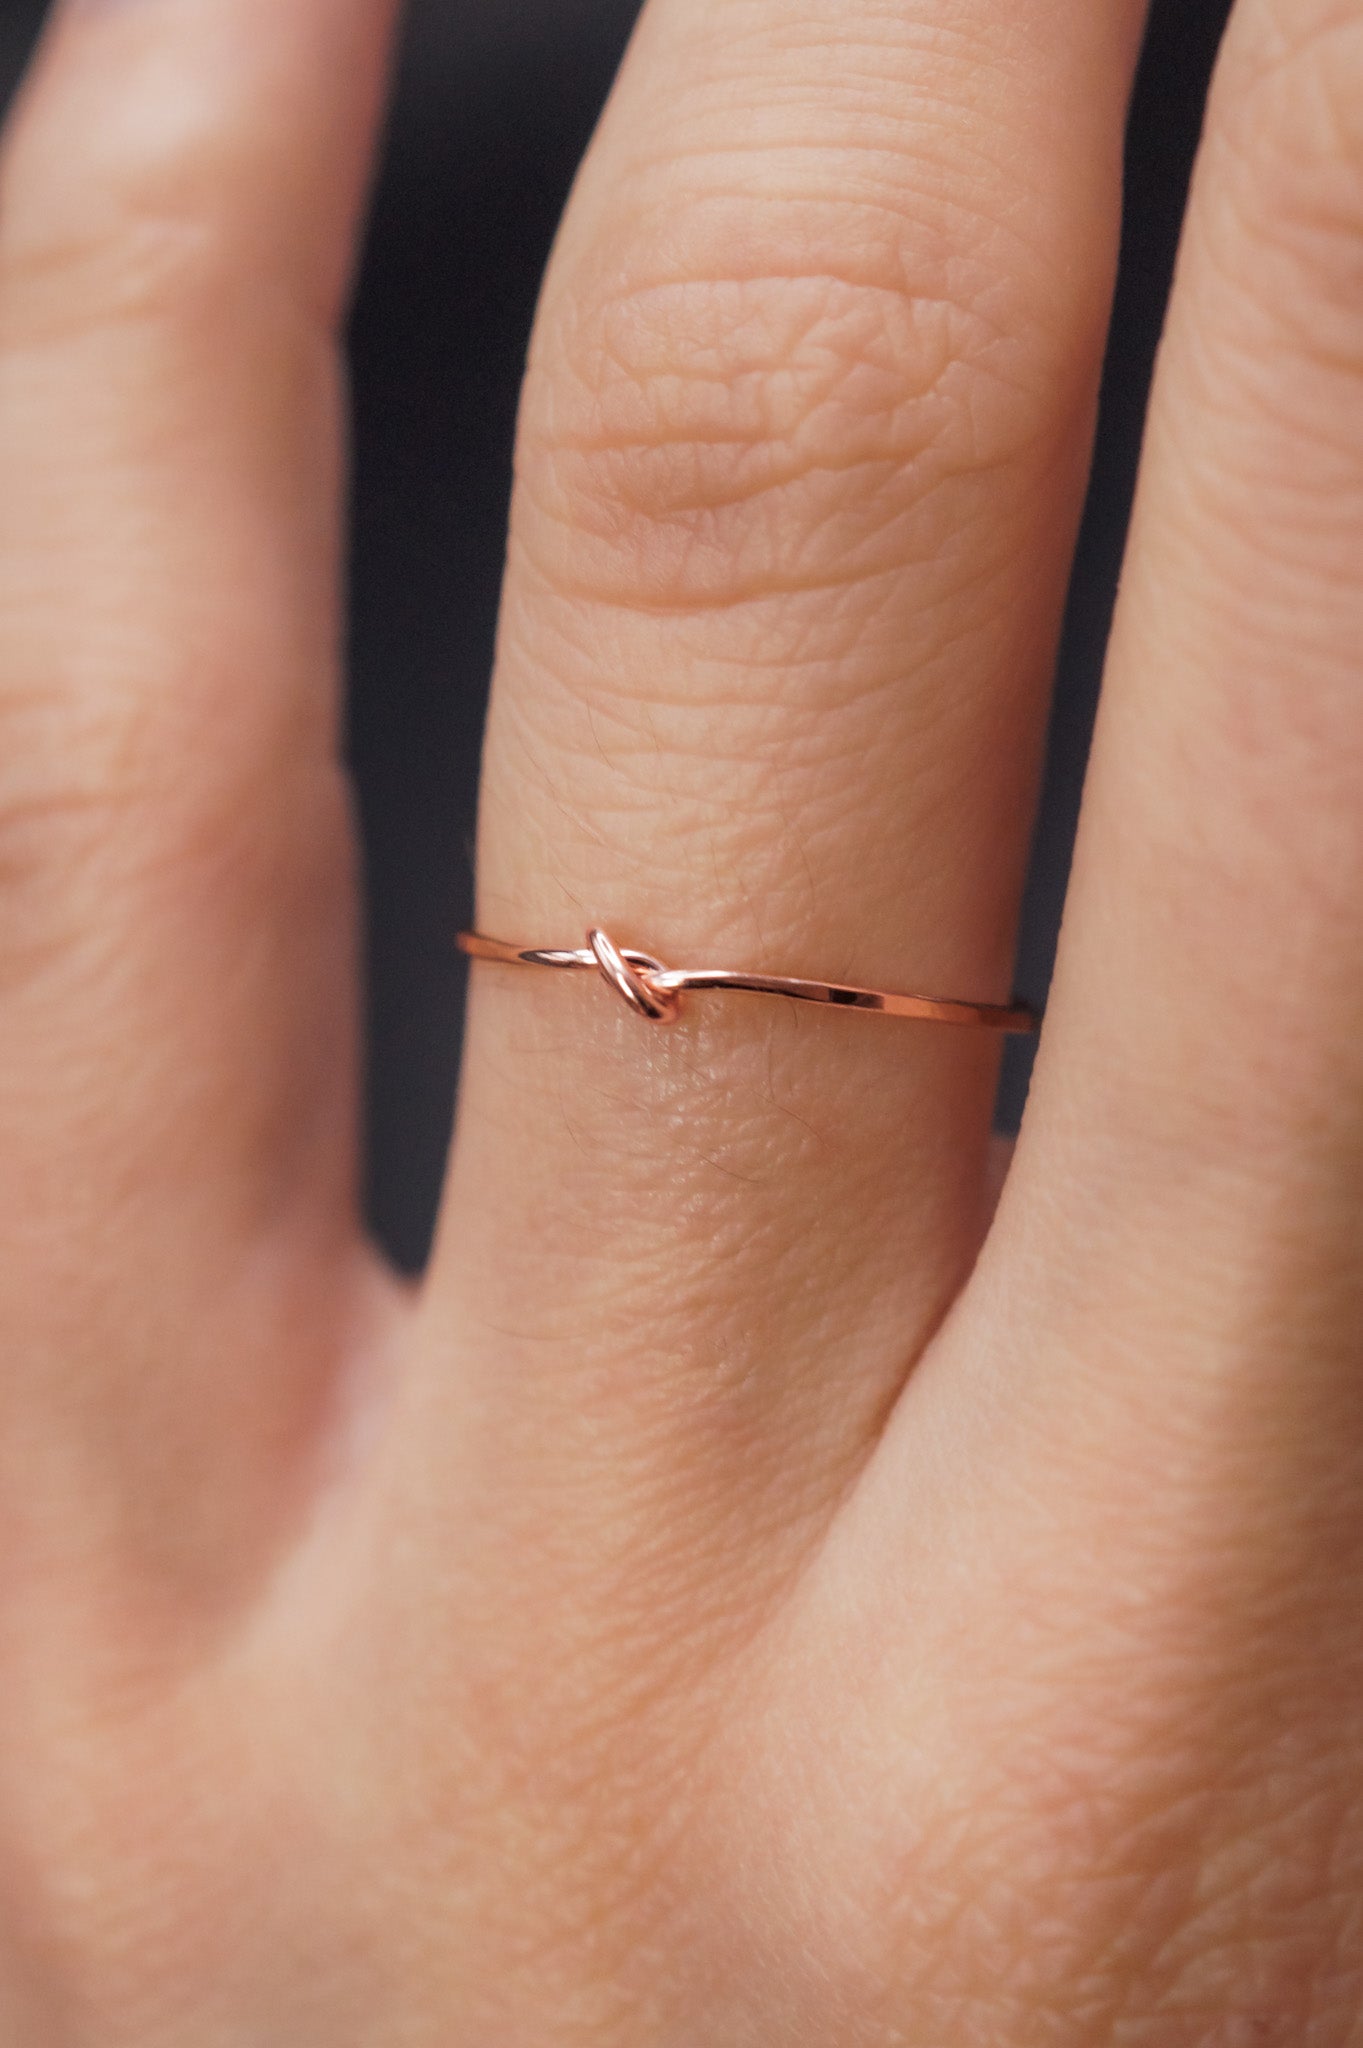 Modeled example of the Ultra Thin Closed Knot in 14k Rose Gold Fill on the ring finger.